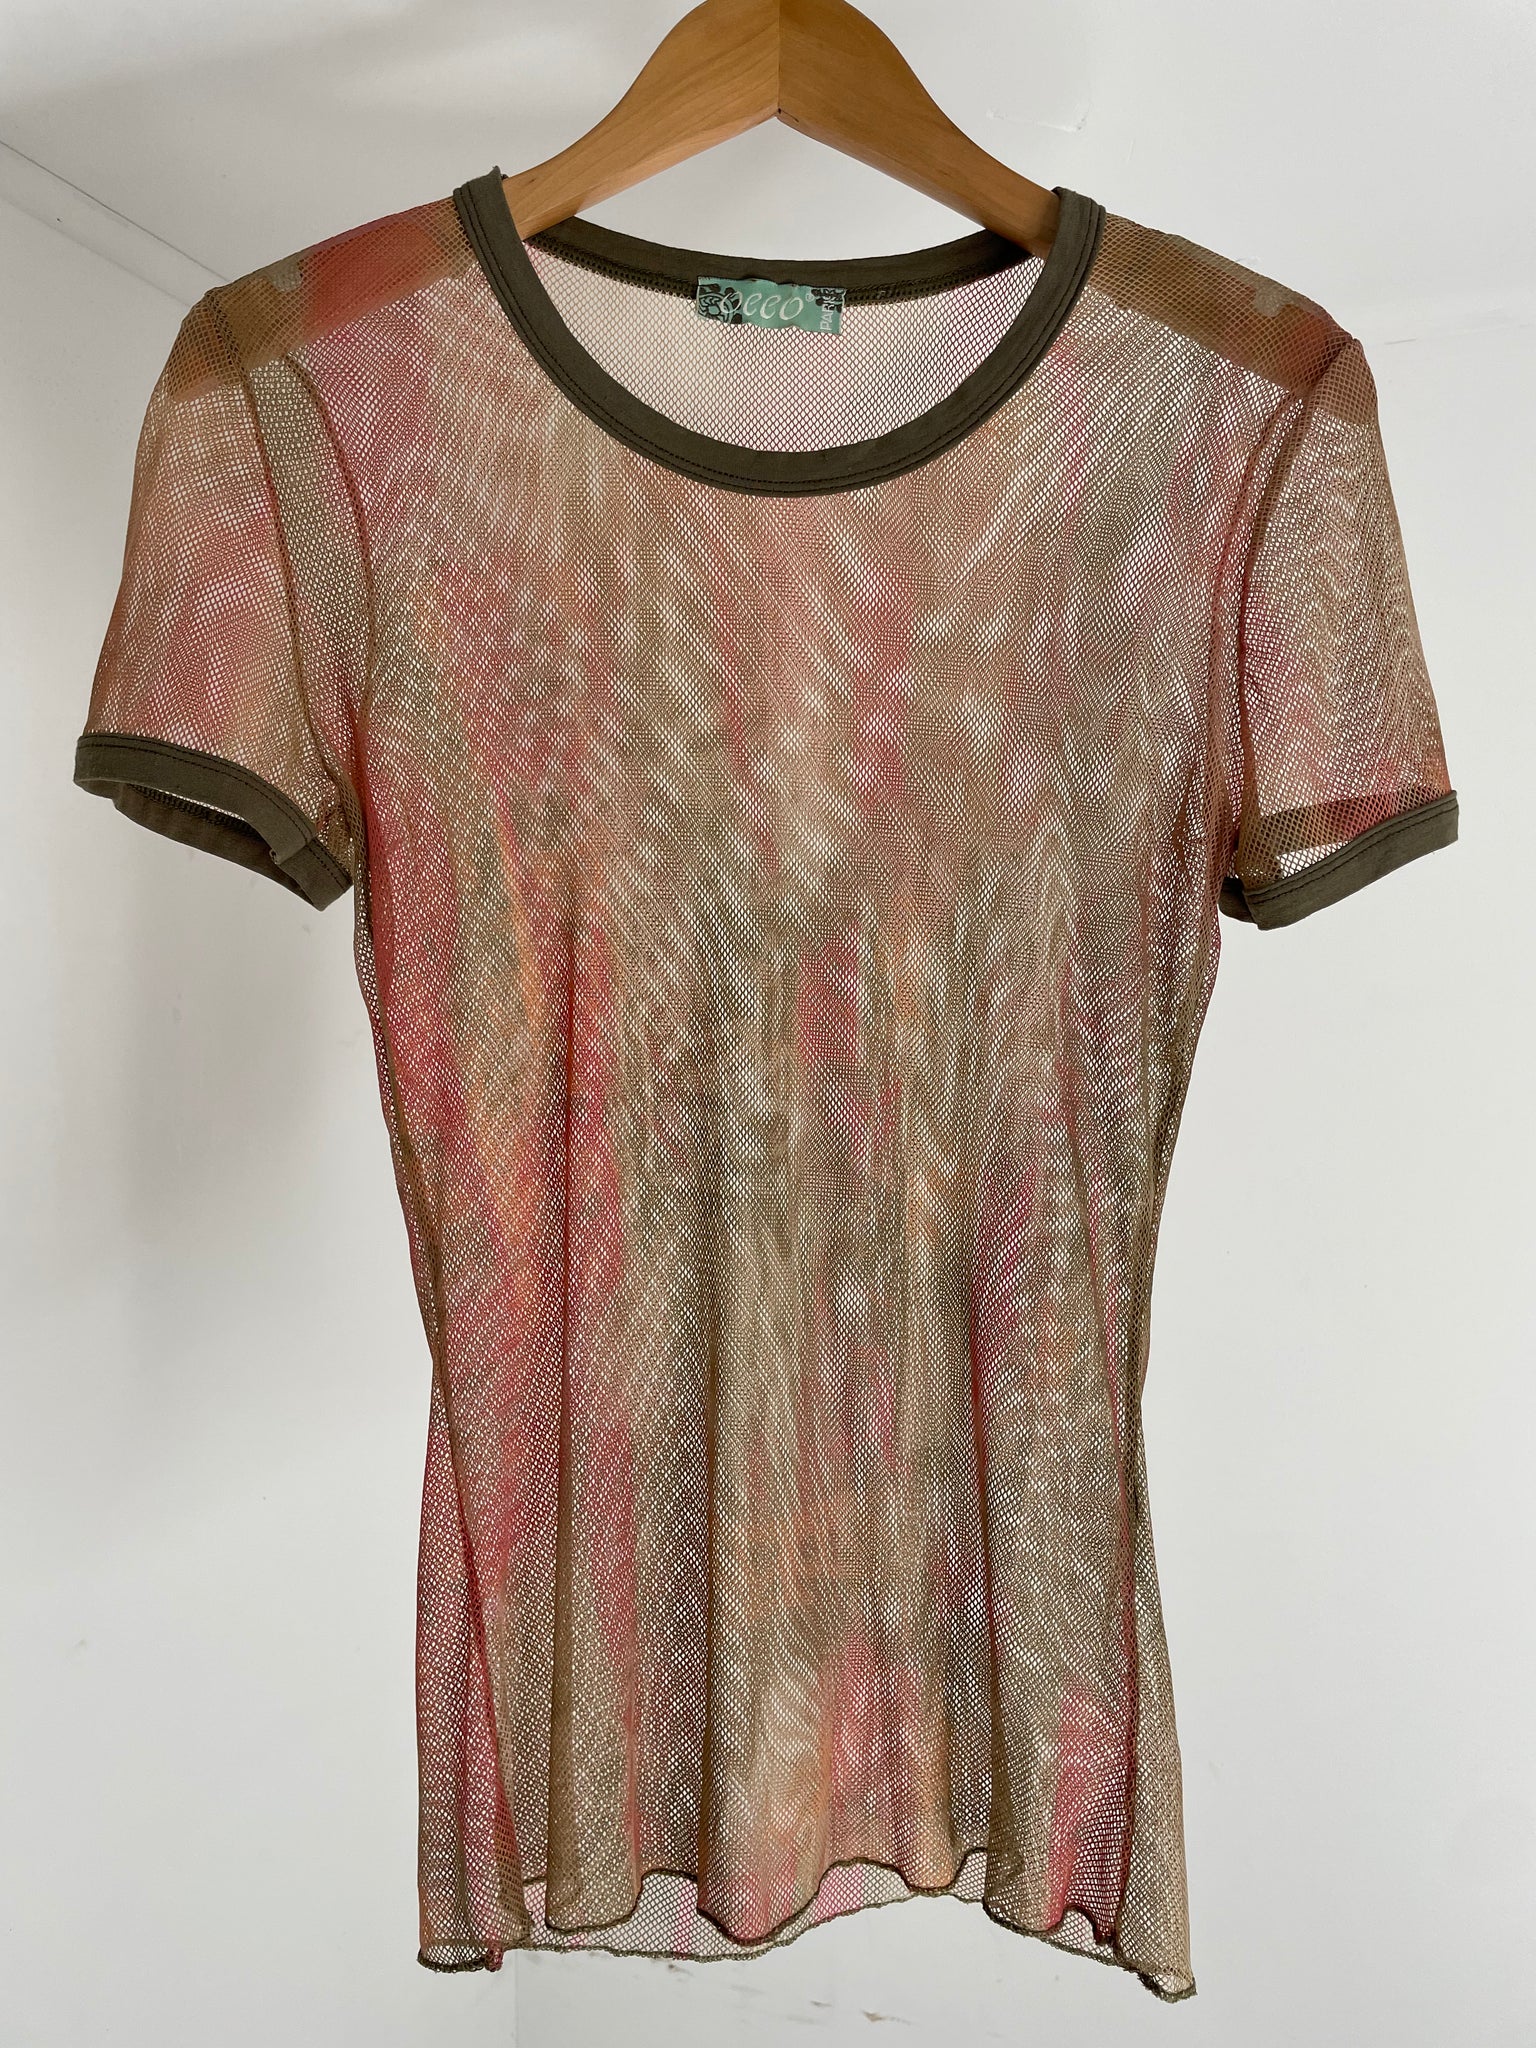 Olive Pink Mesh Top M